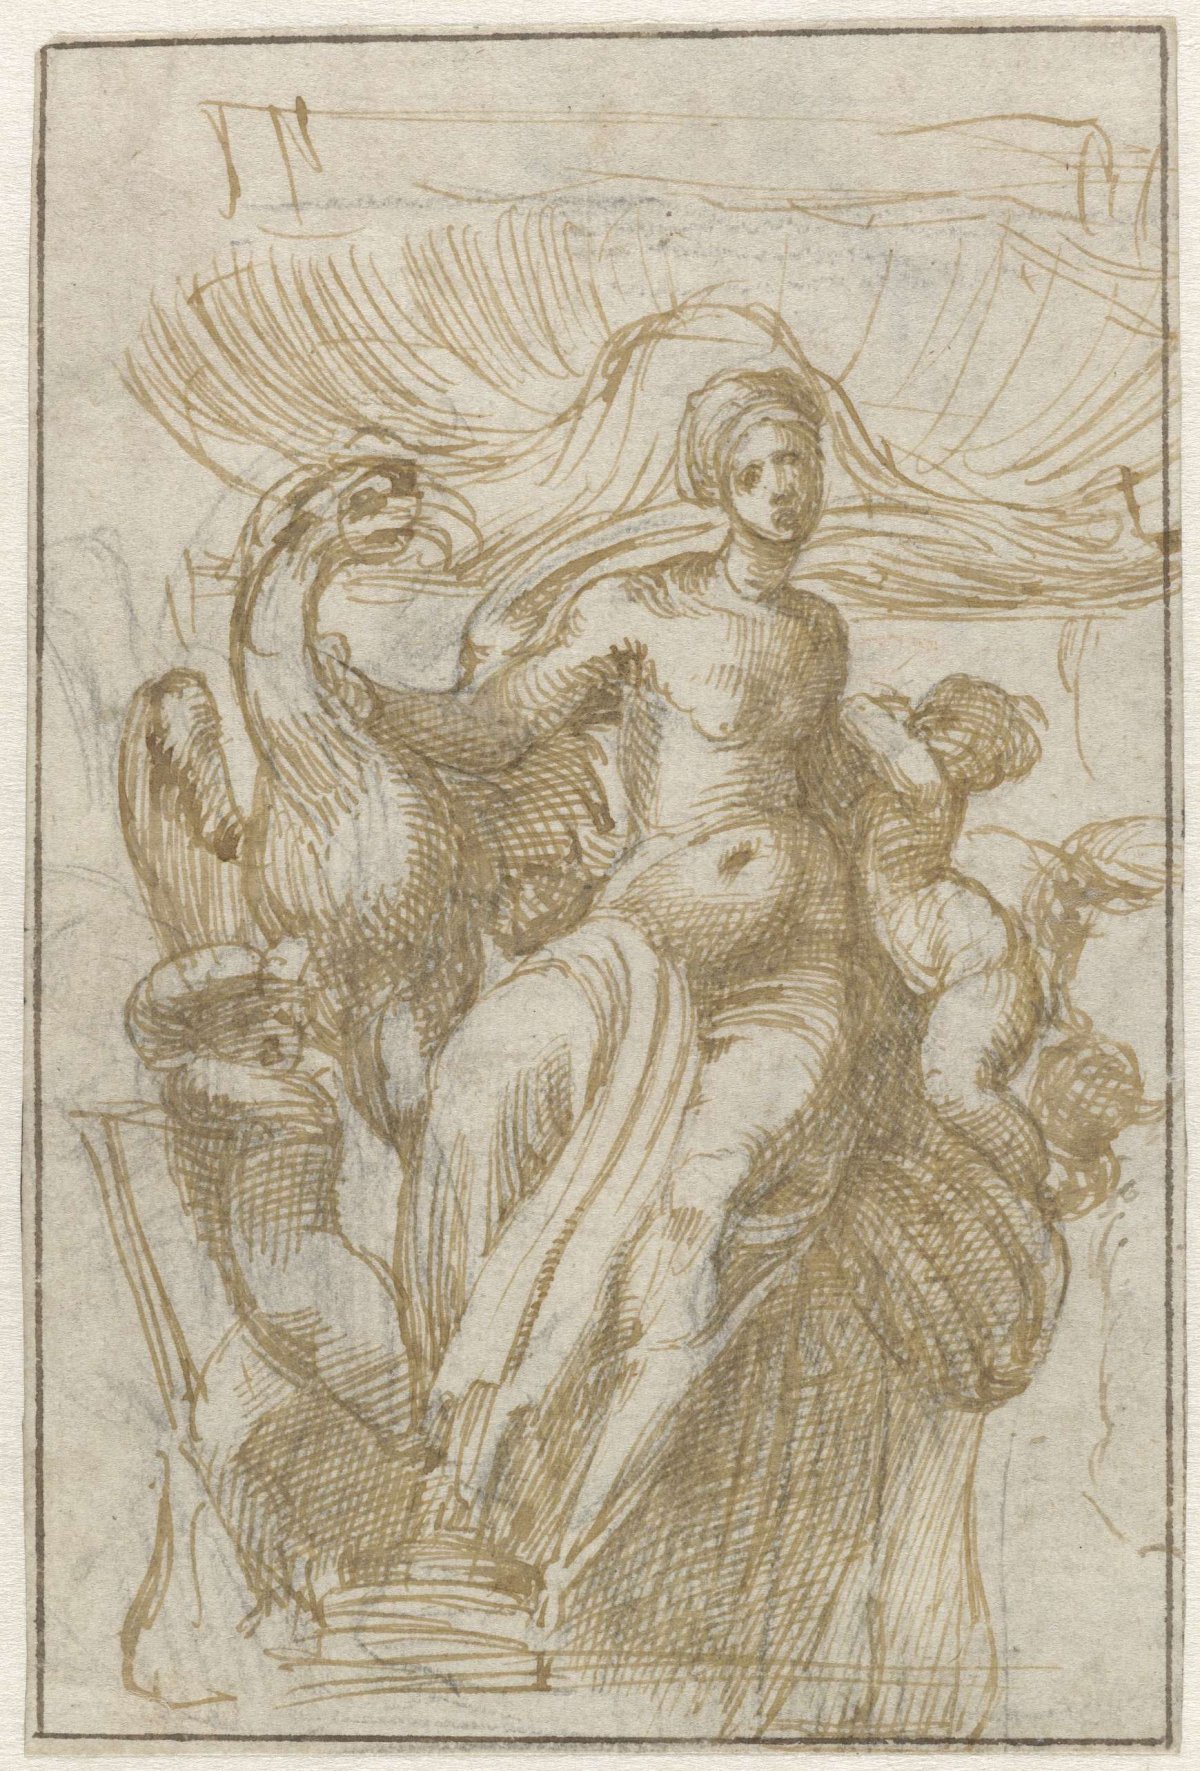 Leda or Venus (?) with bird and putti in front of a shell, Alonso Berruguete, 1500 - 1561